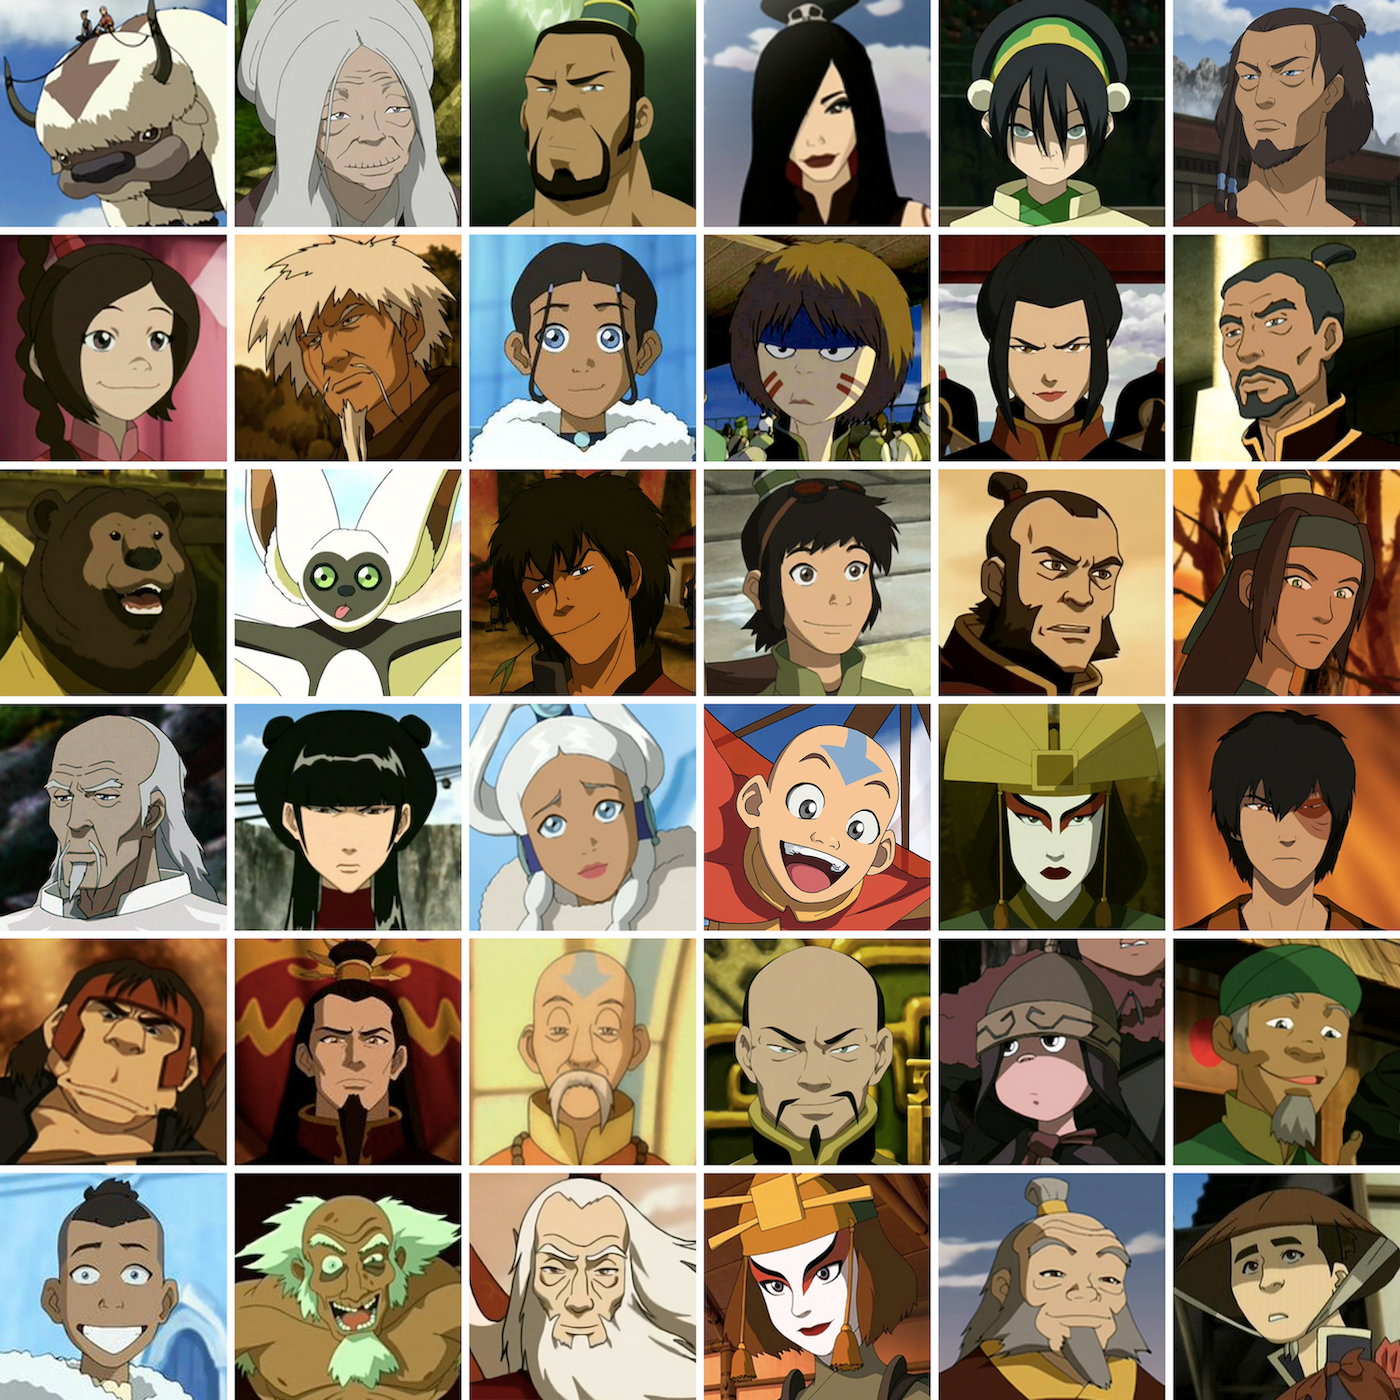 15 Avatar The Last Airbender Characters That Deserve a Spinoff Series